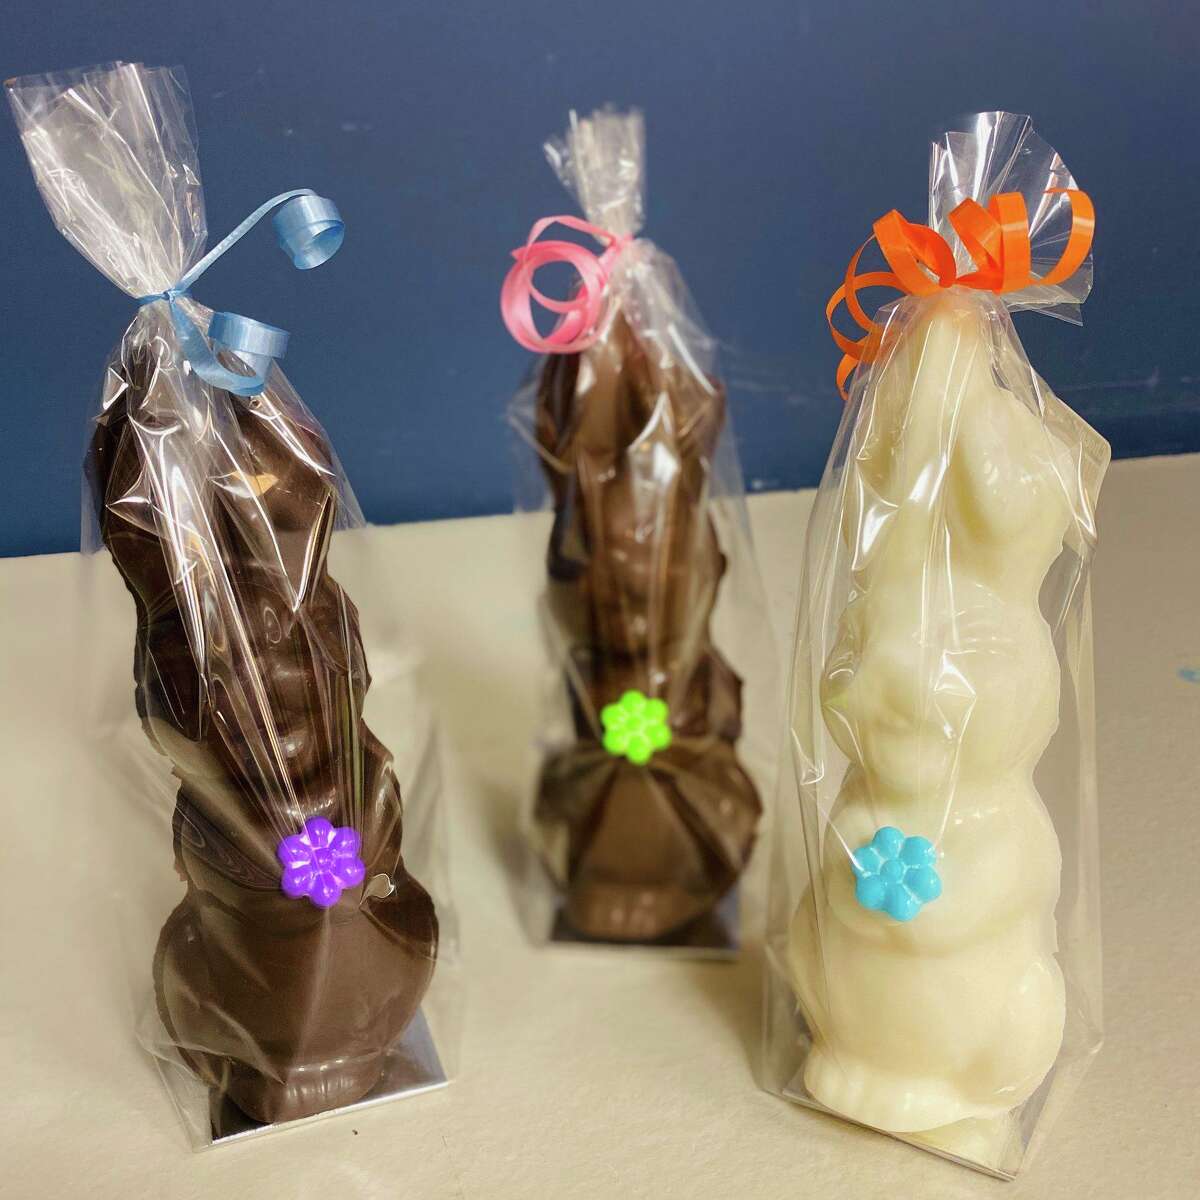 Darien's Chocolate Works is churning out Easter treats.